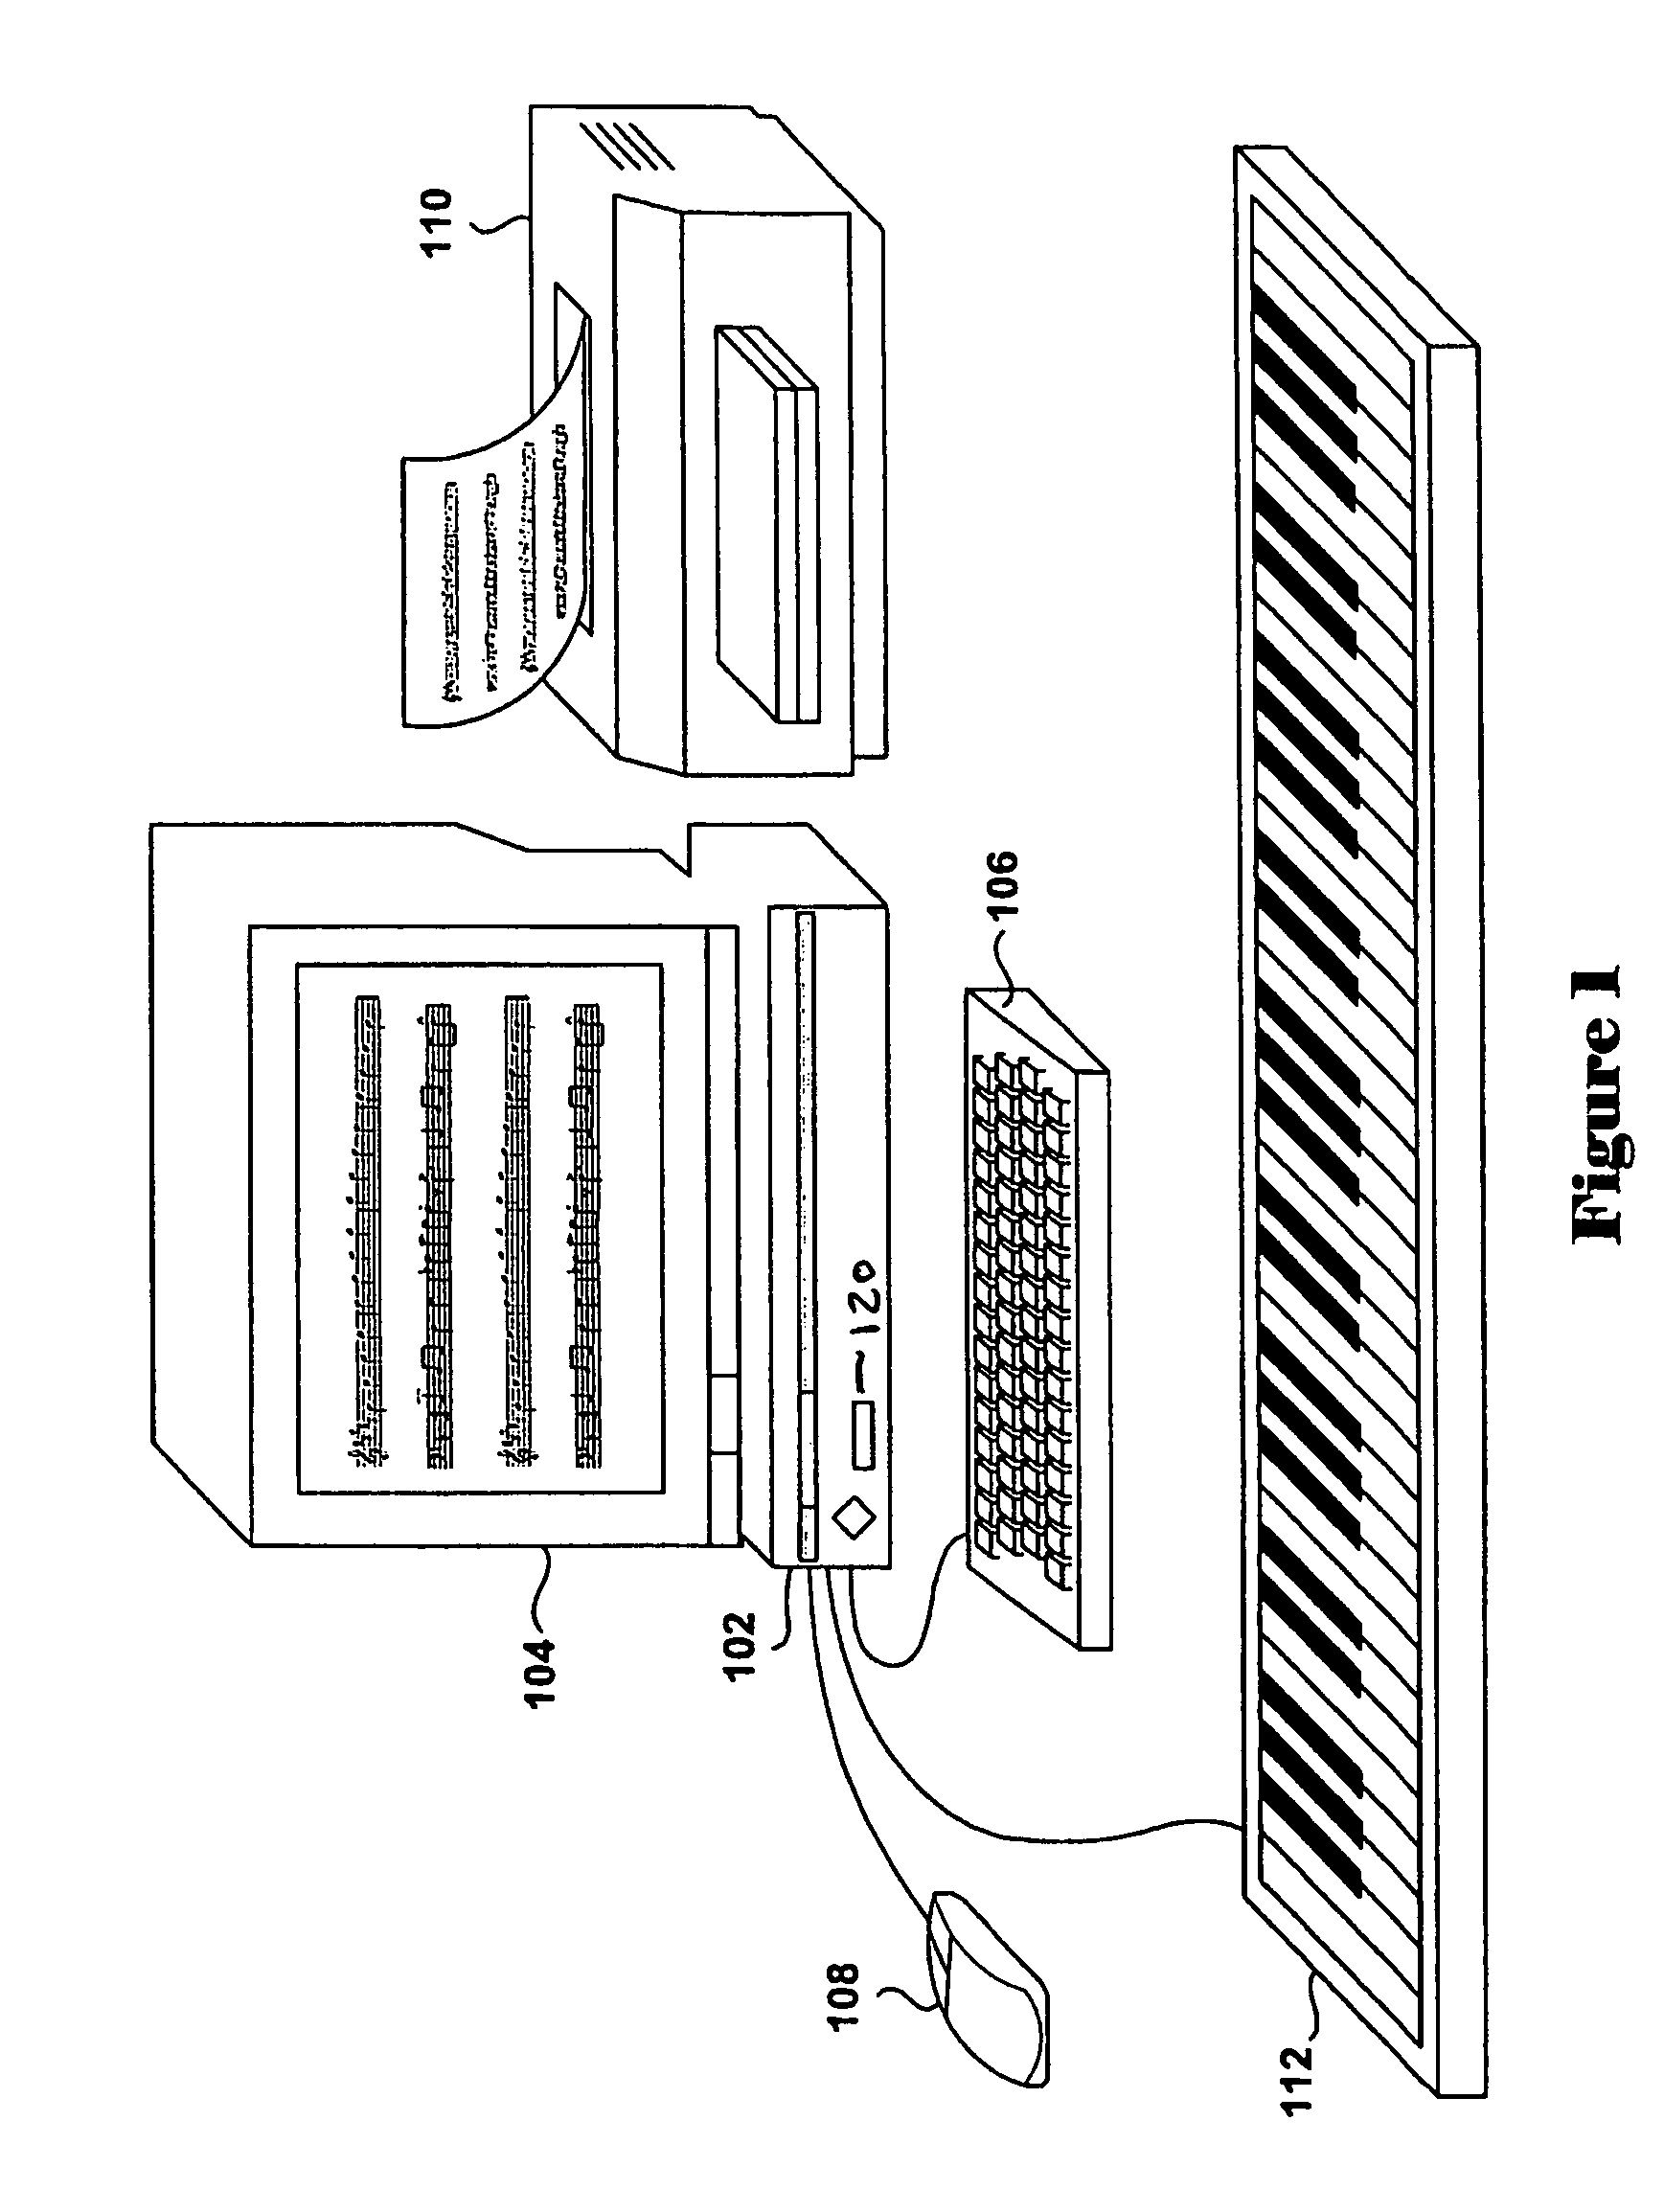 Method and system for generating musical variations directed to particular skill-levels